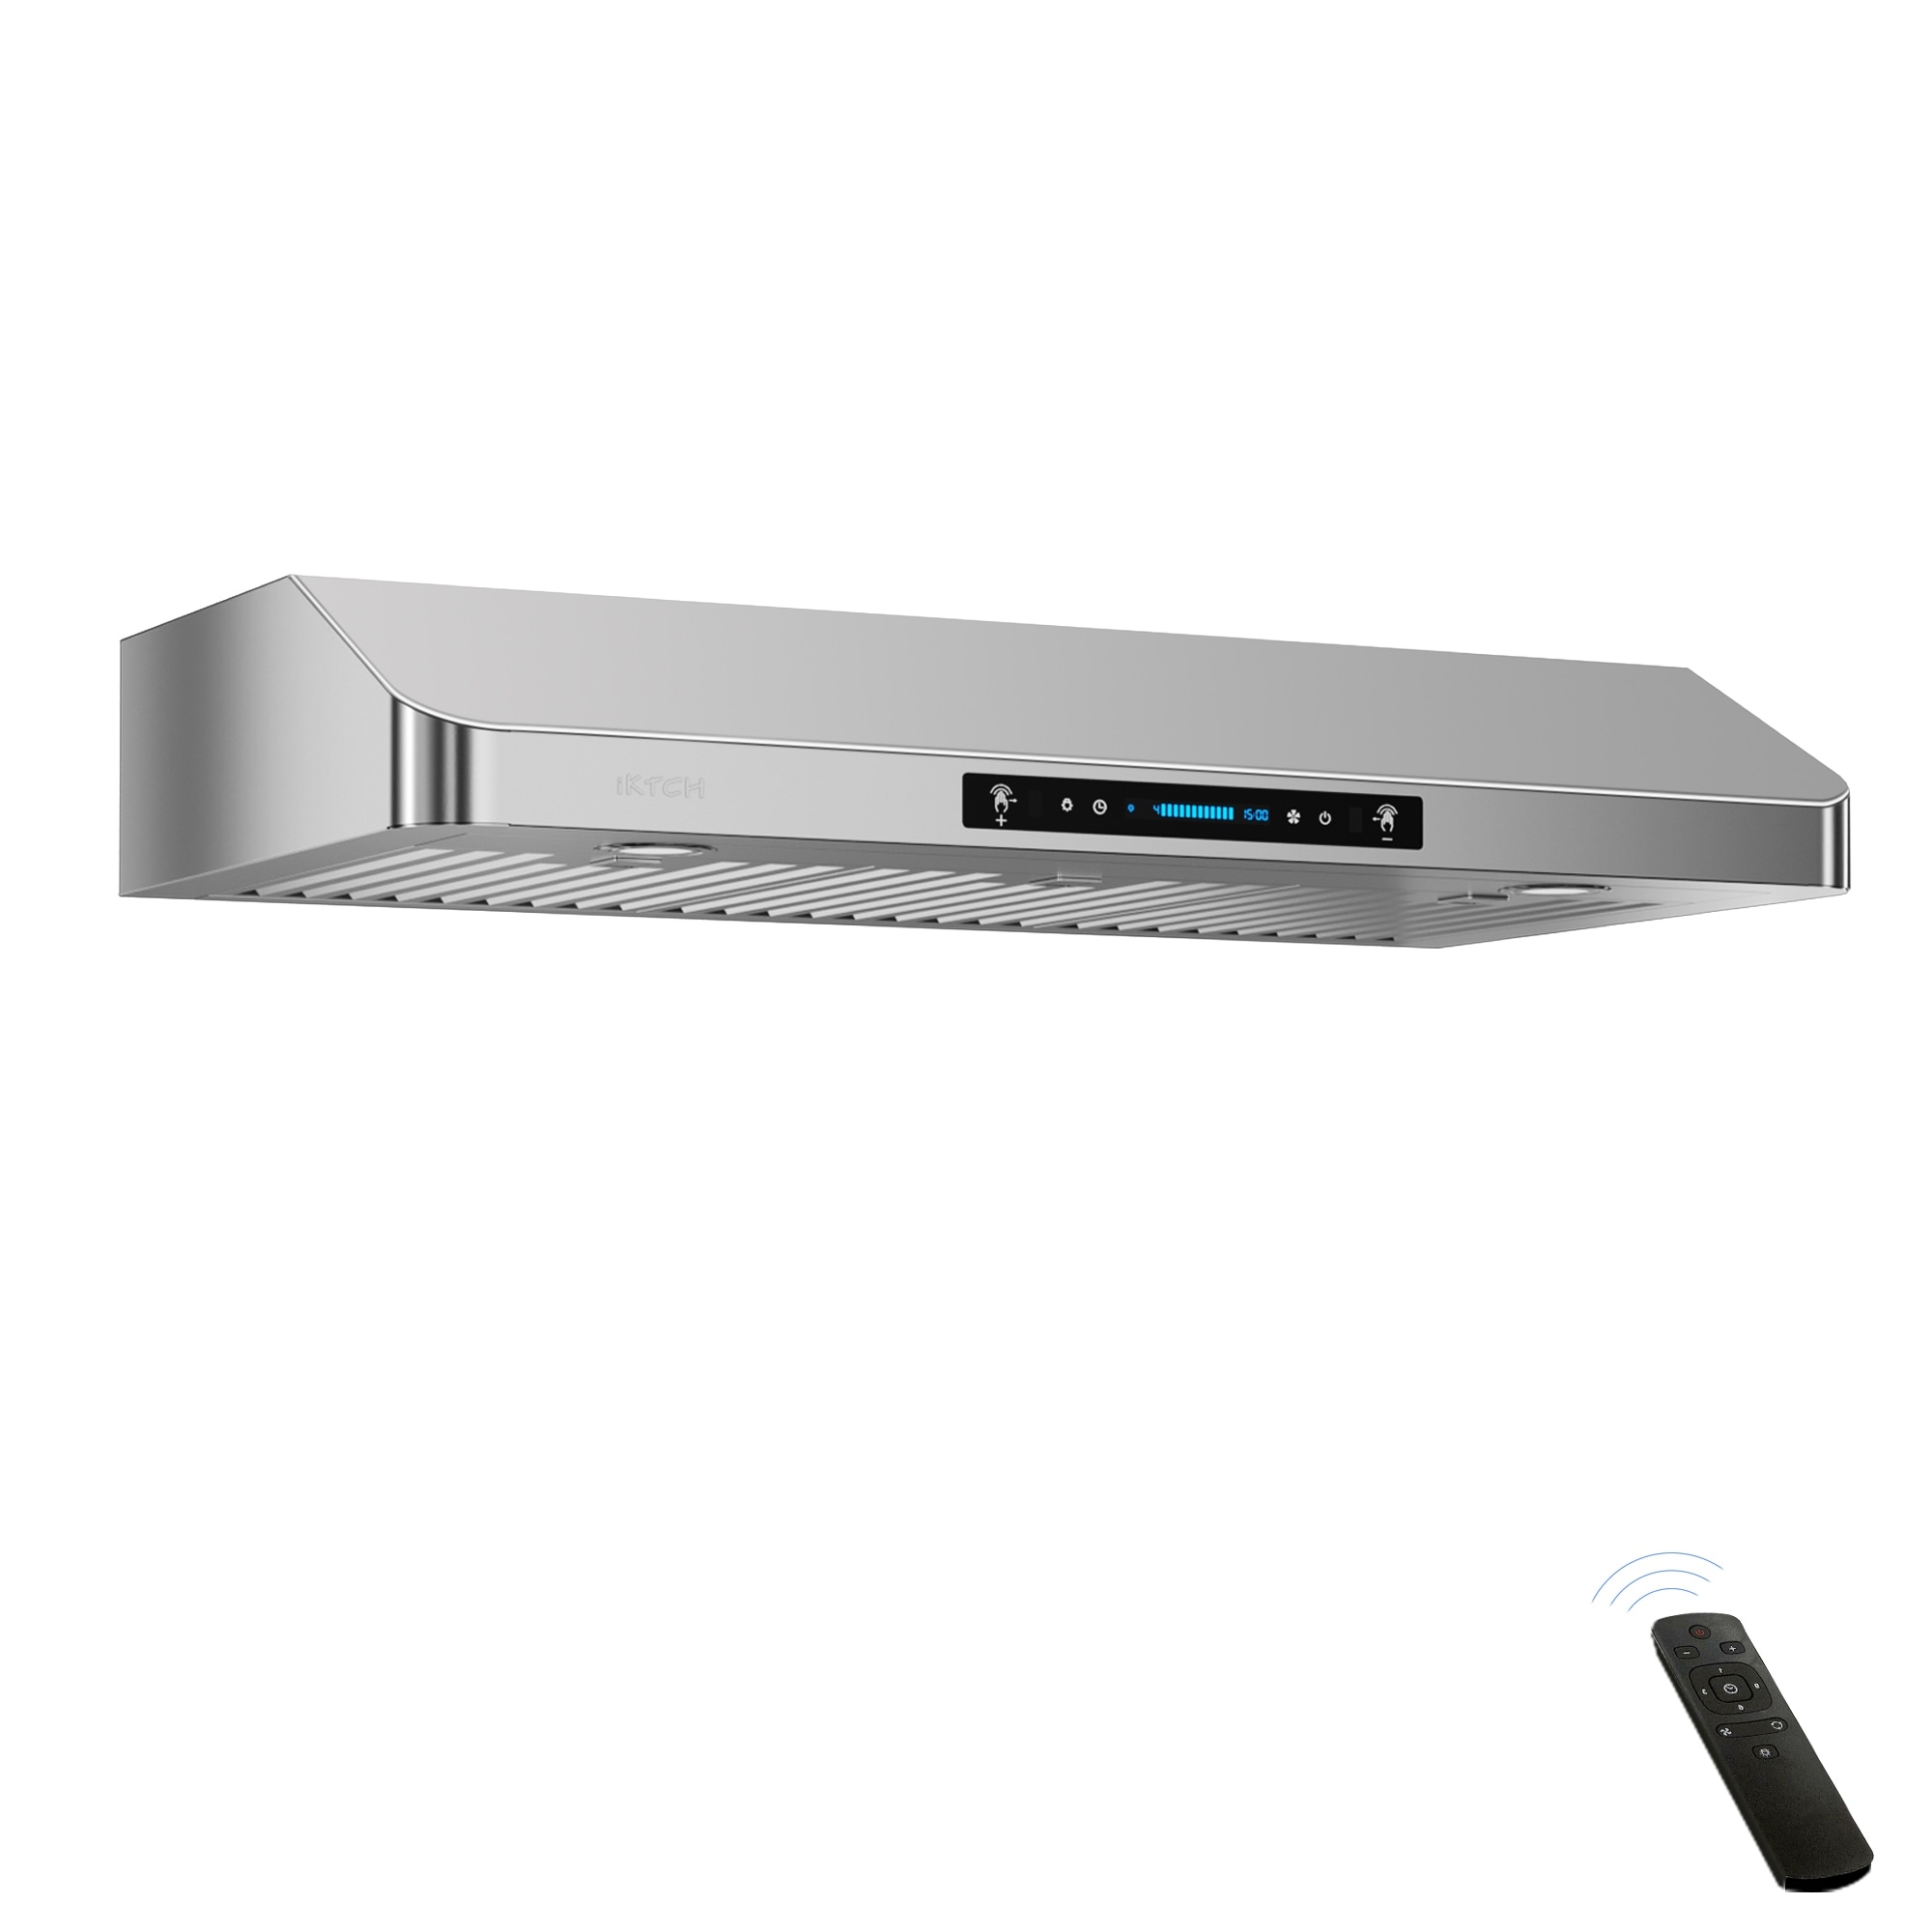 IKTCH 30 inch Vent Wall Mount Range Hood - 900 CFM Efficient Smoke Removal Ultra-Quiet Operation - Silver